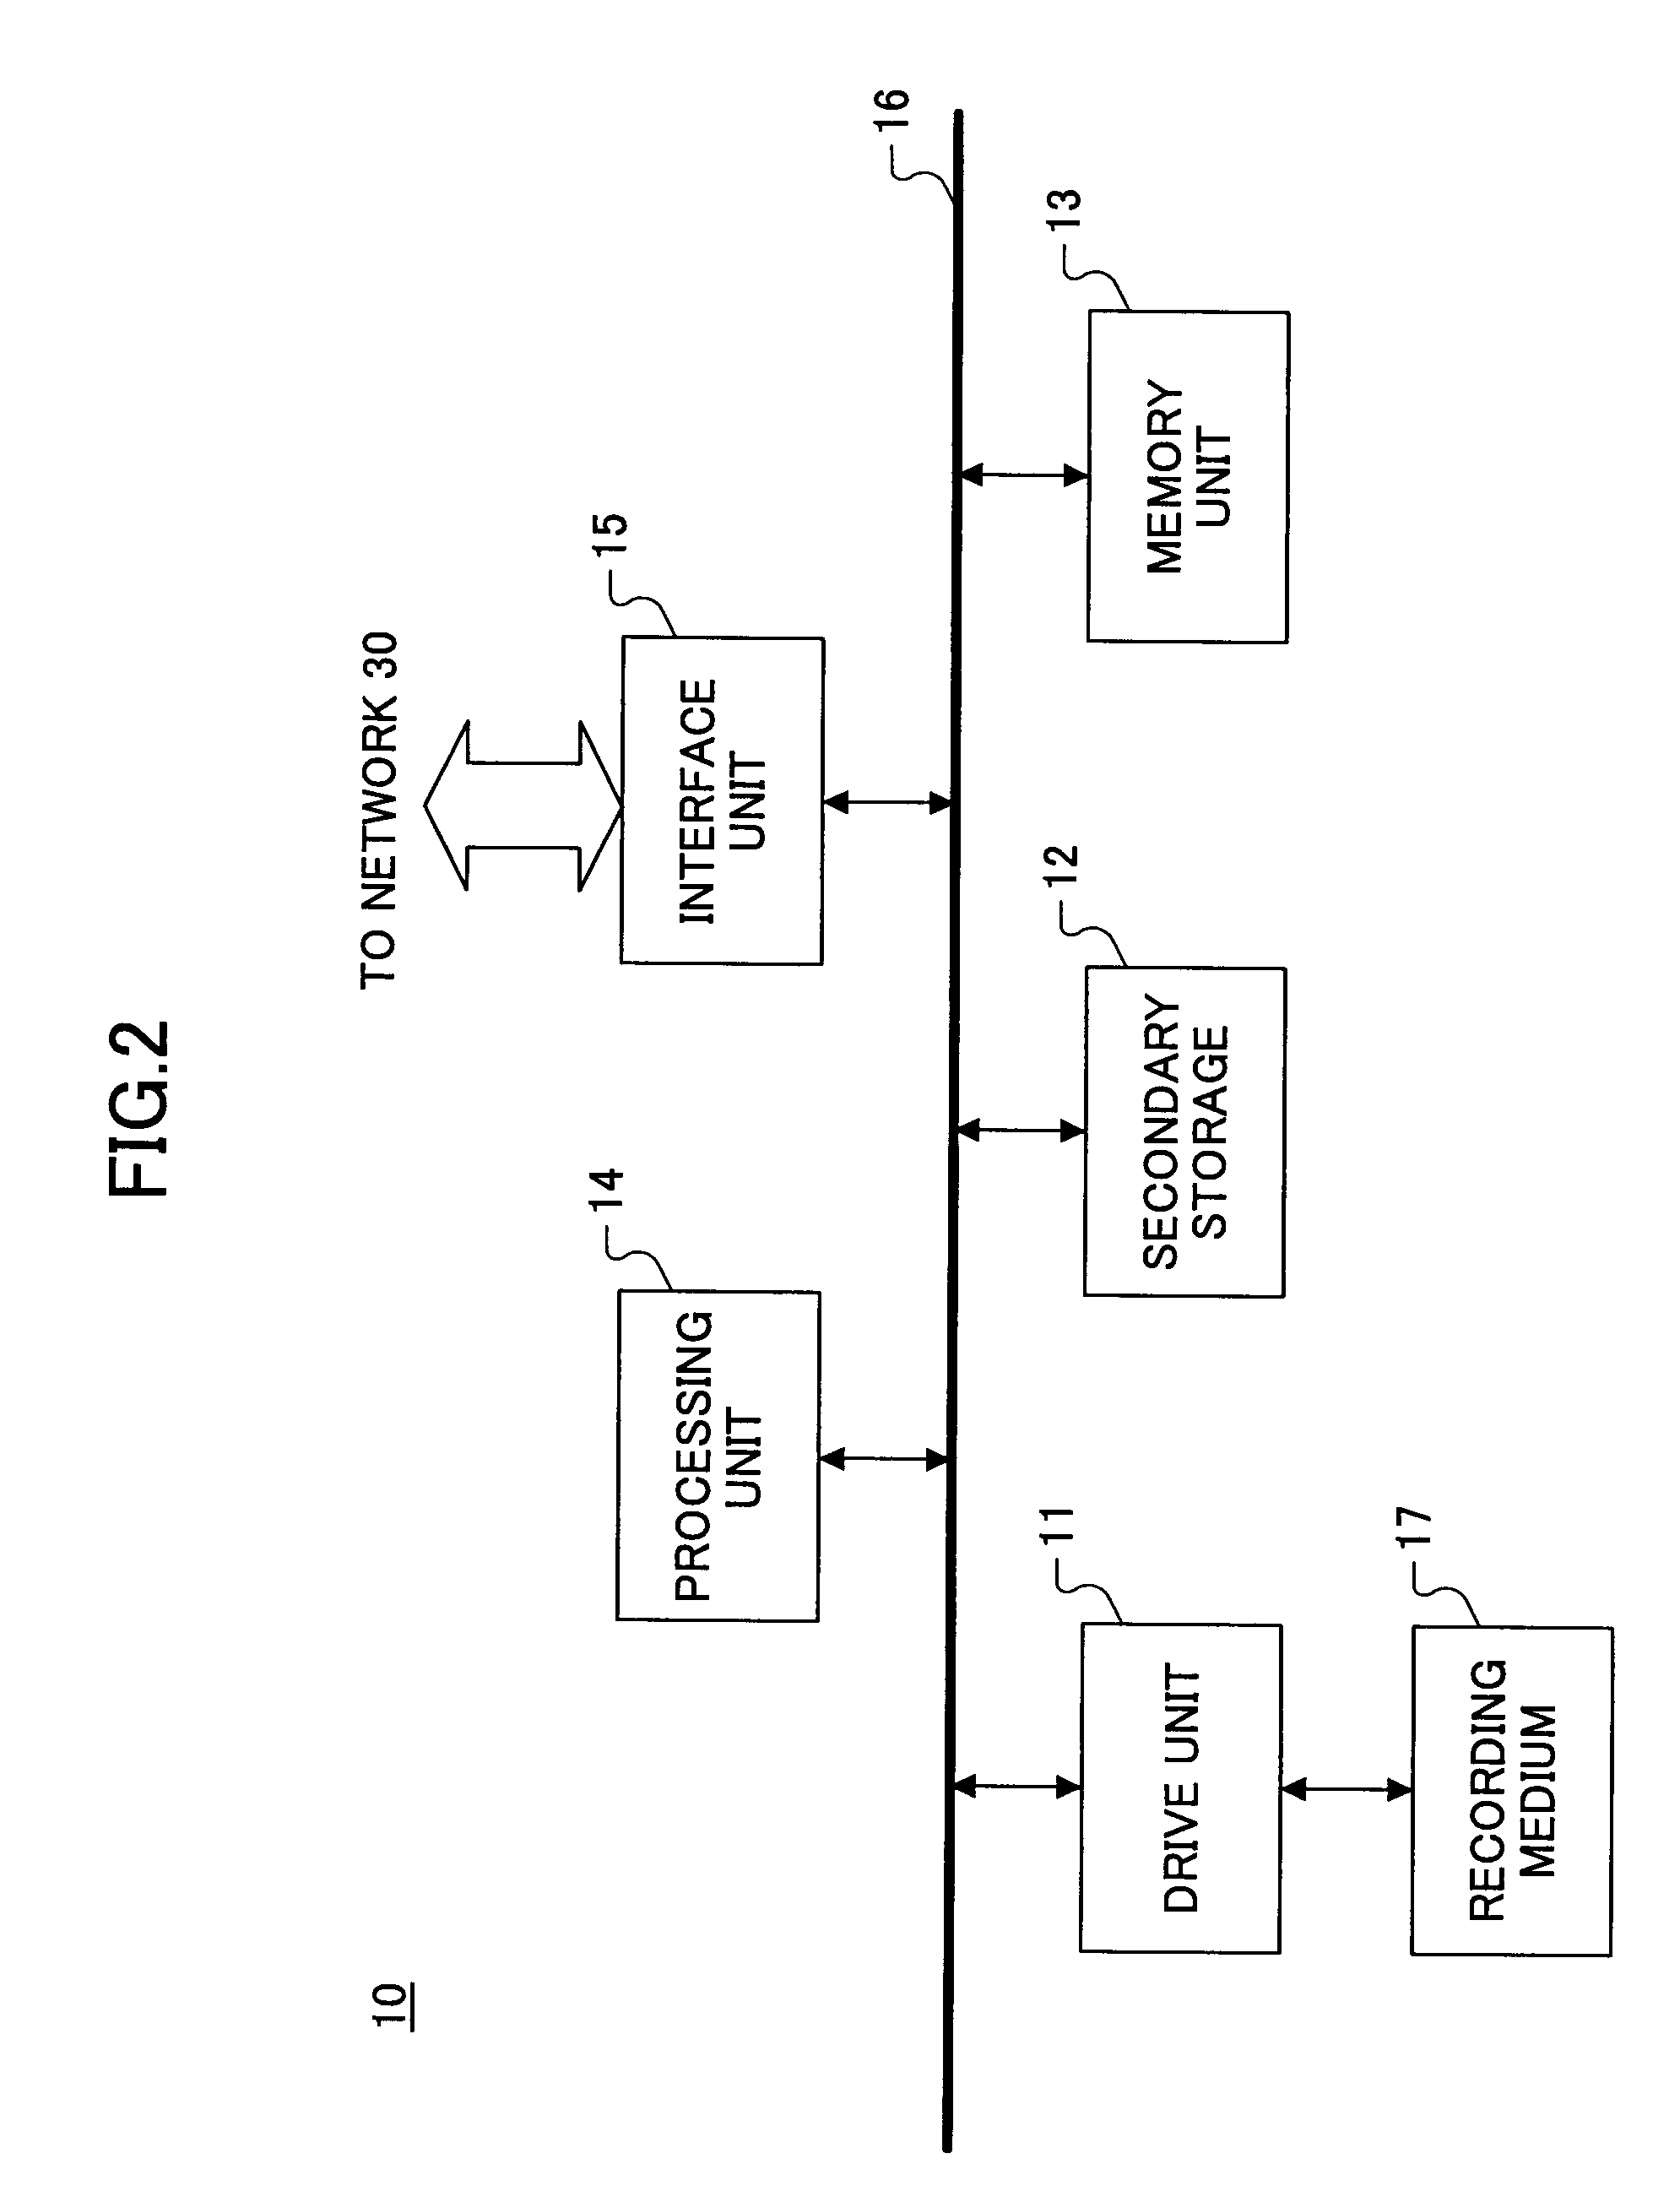 Information processing apparatus, program product, and recording medium capable of appropriately executing an output process even when uninterpretable information is included in output setting information